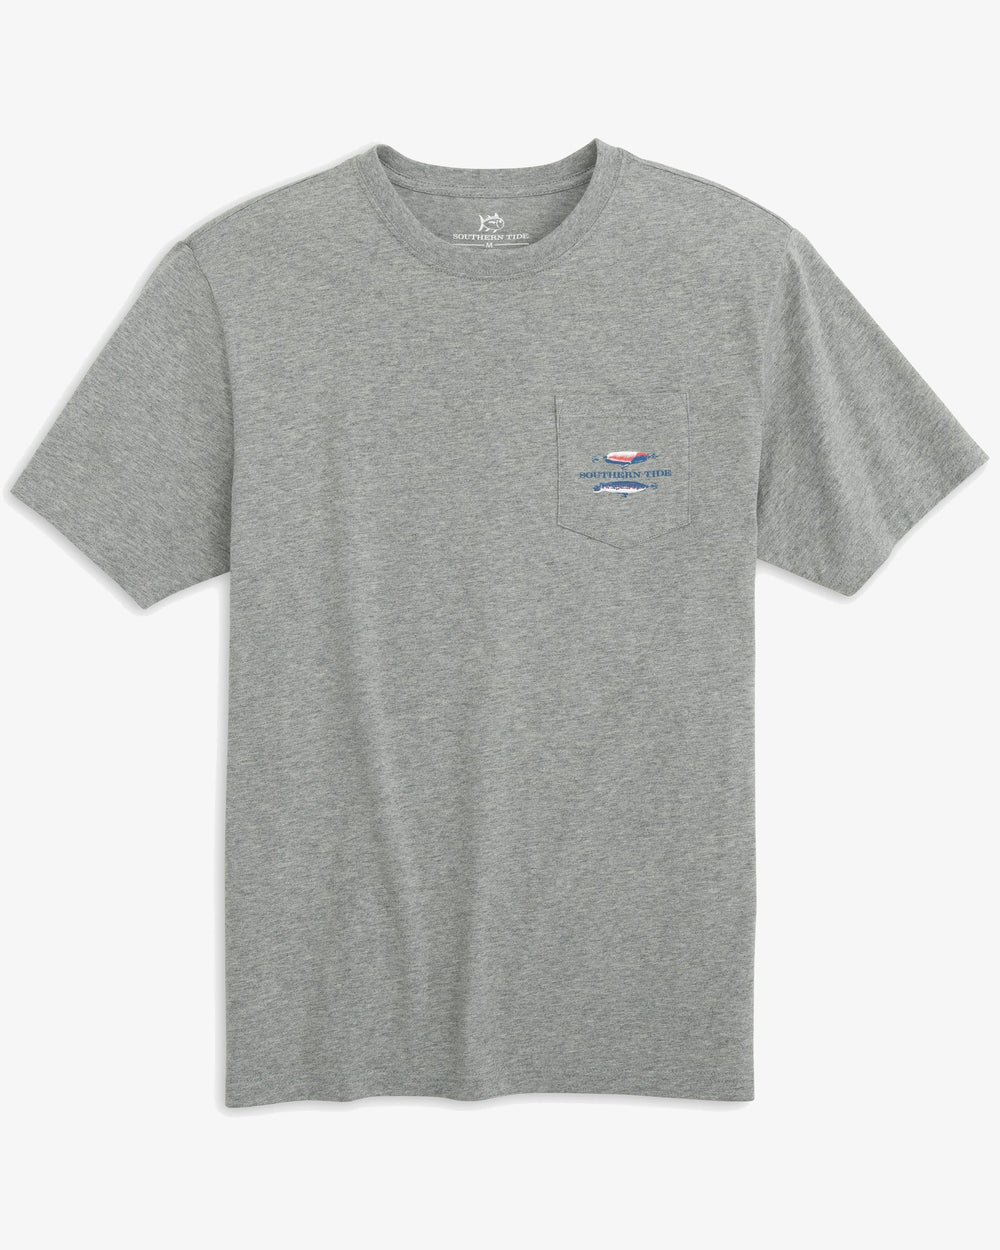 The front view of the Men's Bobbers and Lures Tide T-Shirt by Southern Tide - Heather Grey